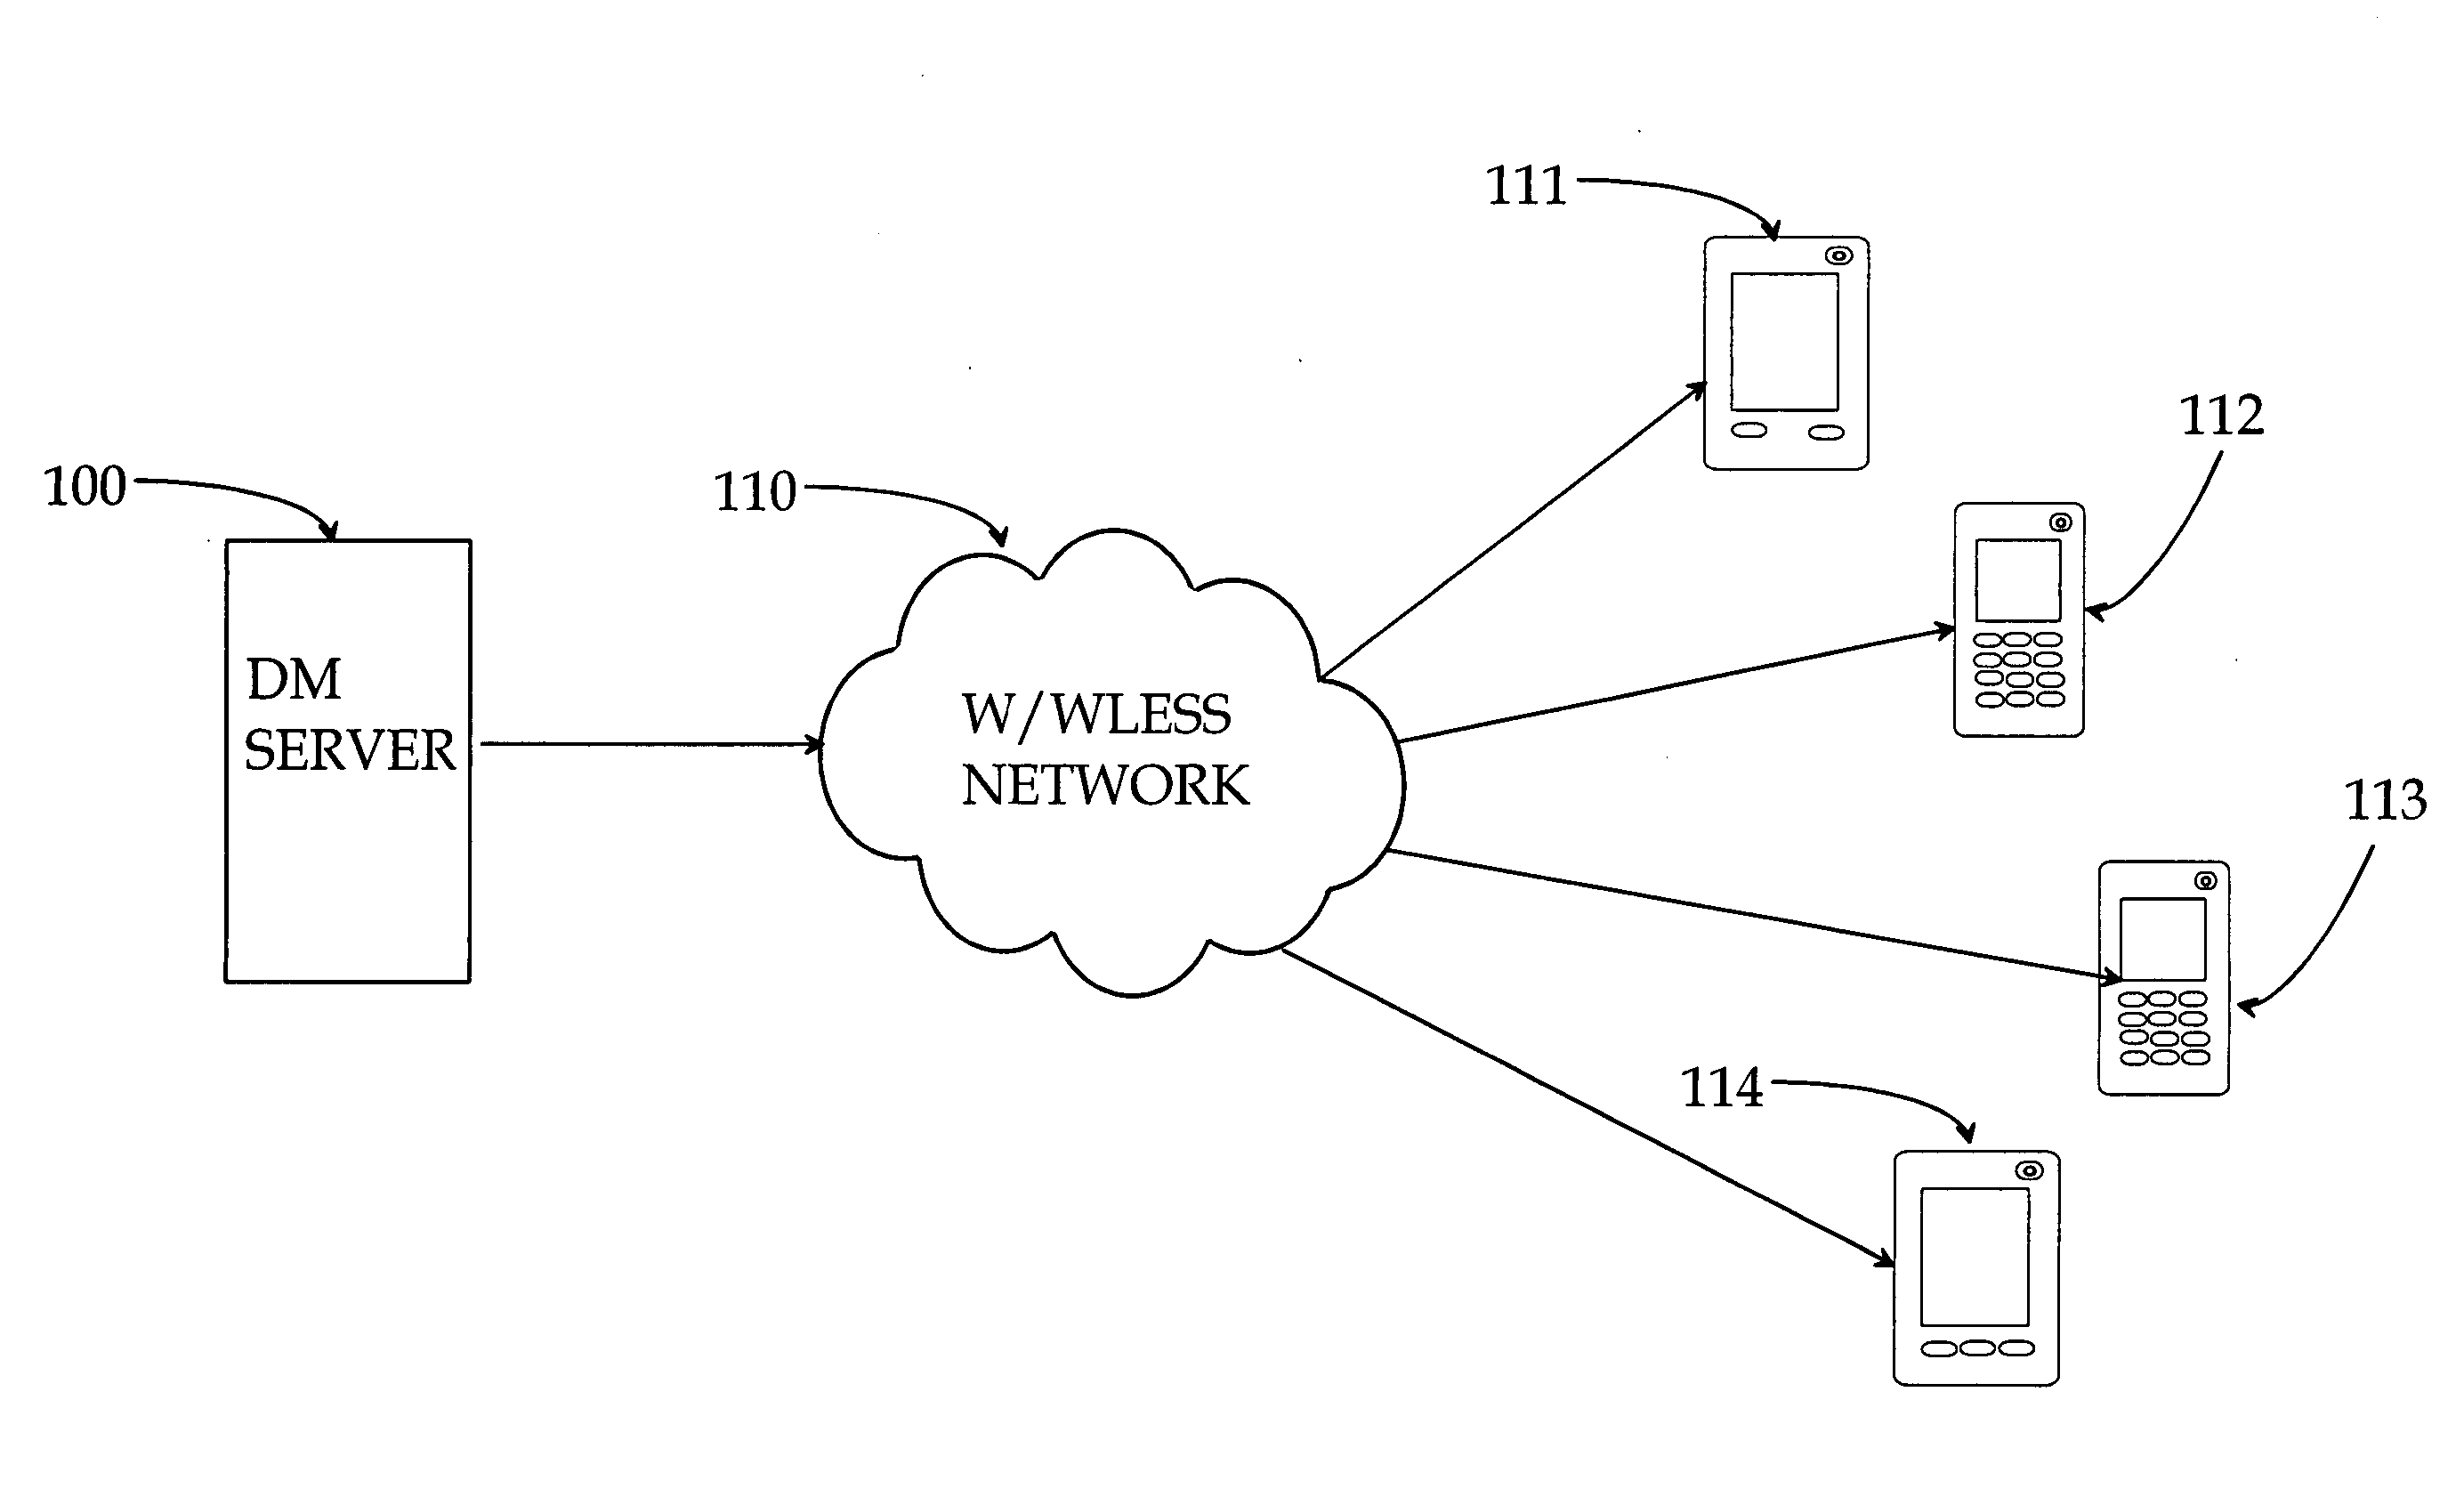 Device management with configuration information